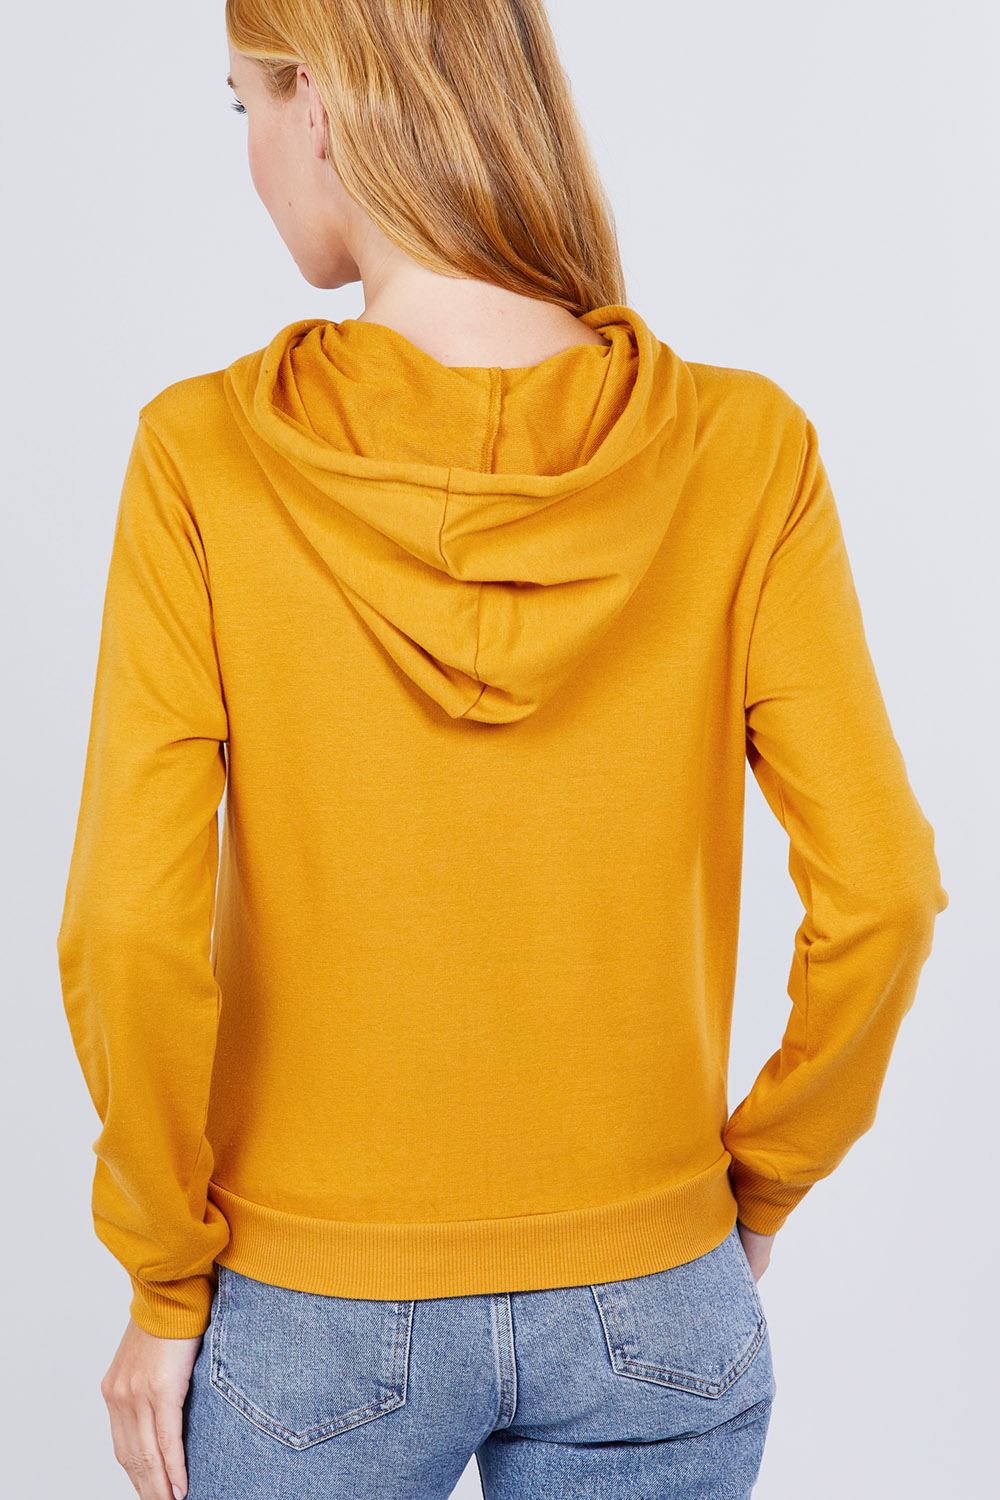 Long Sleeve Sparkly Sequins Hoodie Pullover Women Fall Pullover Tops in Mustard